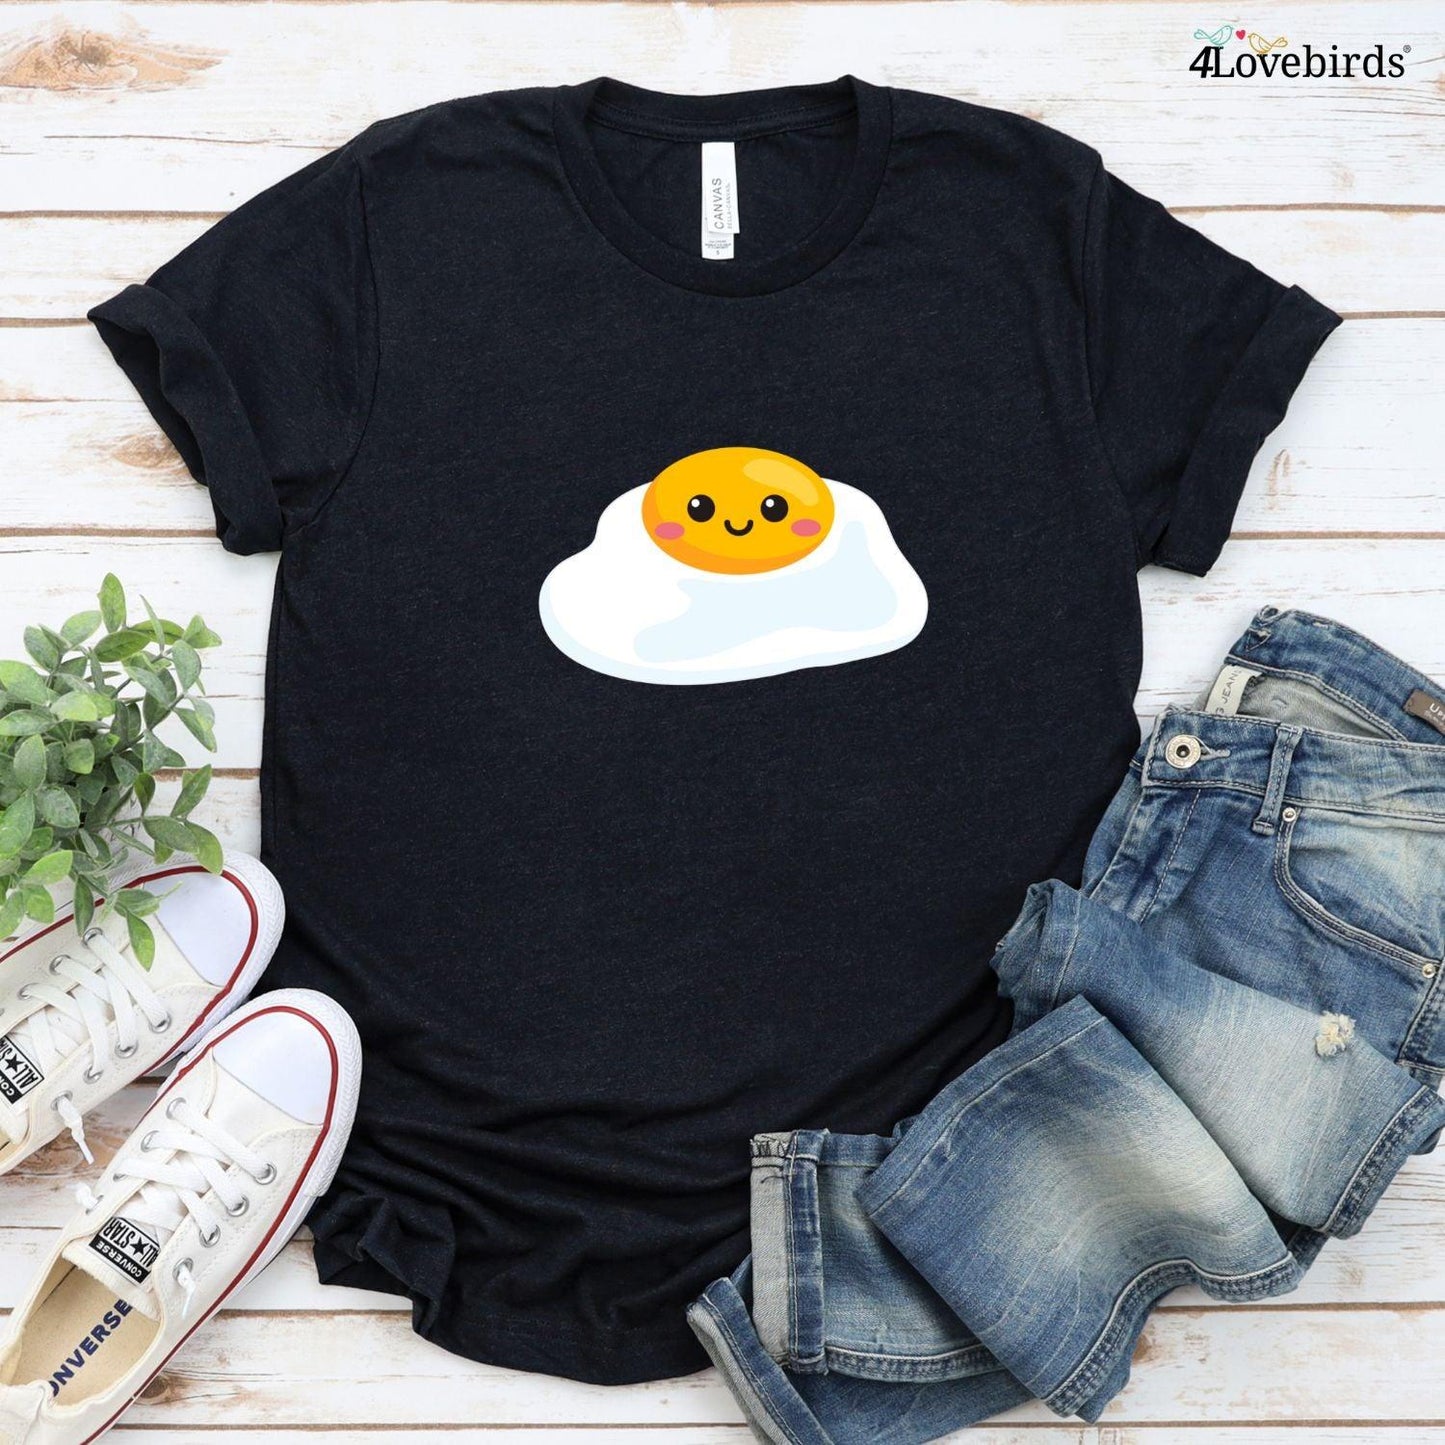 Matching Set: Bacon & Eggs Foodie Lovers Gift for Couples, Valentine Outfit, Best Food Duo Cute Tops - 4Lovebirds